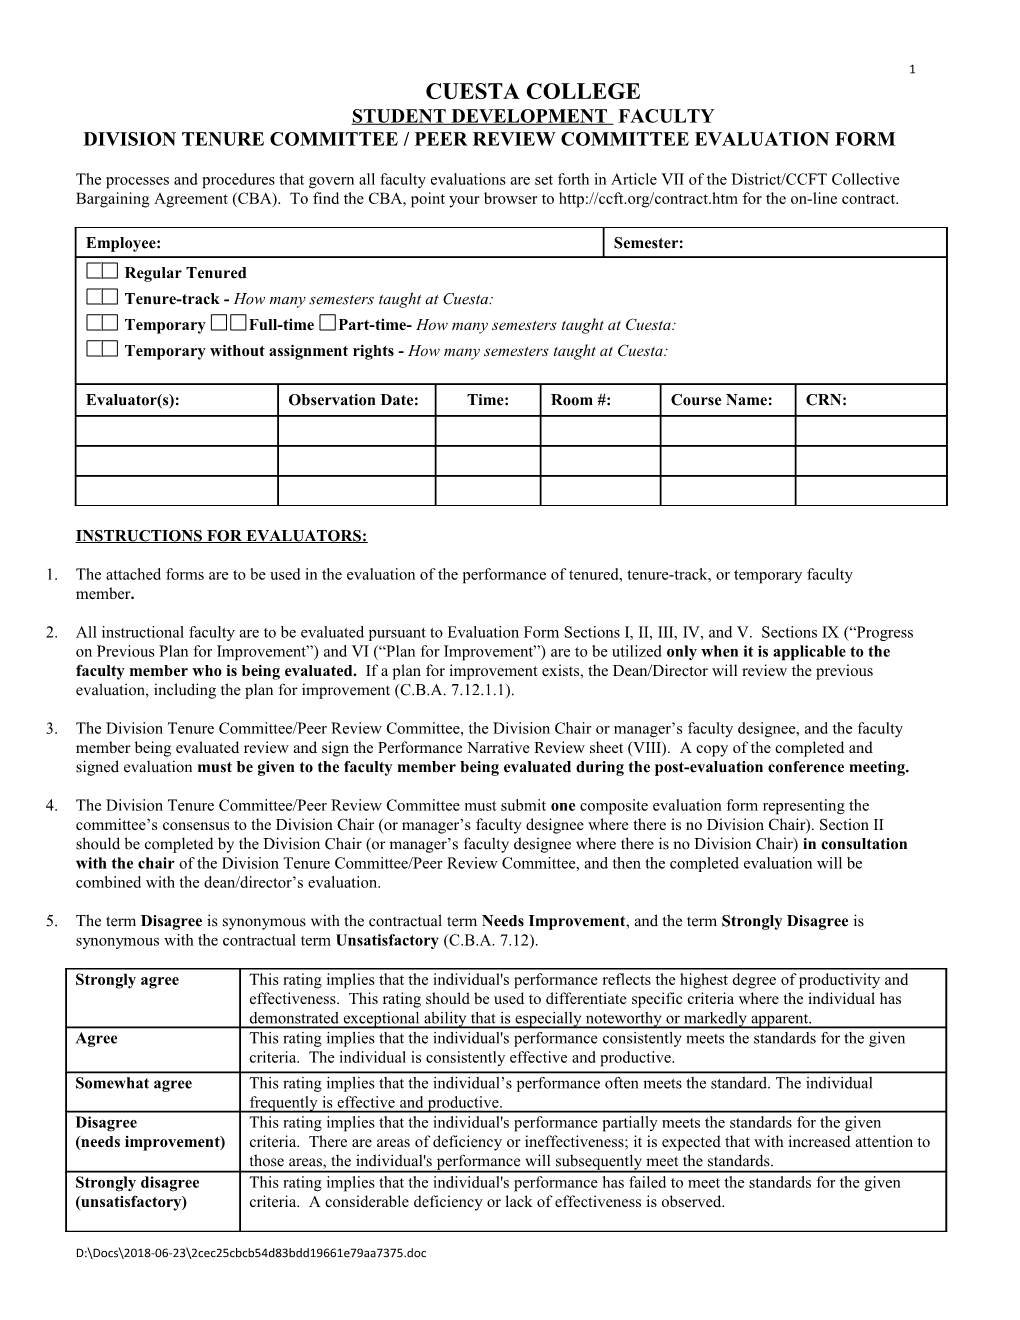 DIVISION TENURE COMMITTEE / Peer Review Committee Evaluation Form